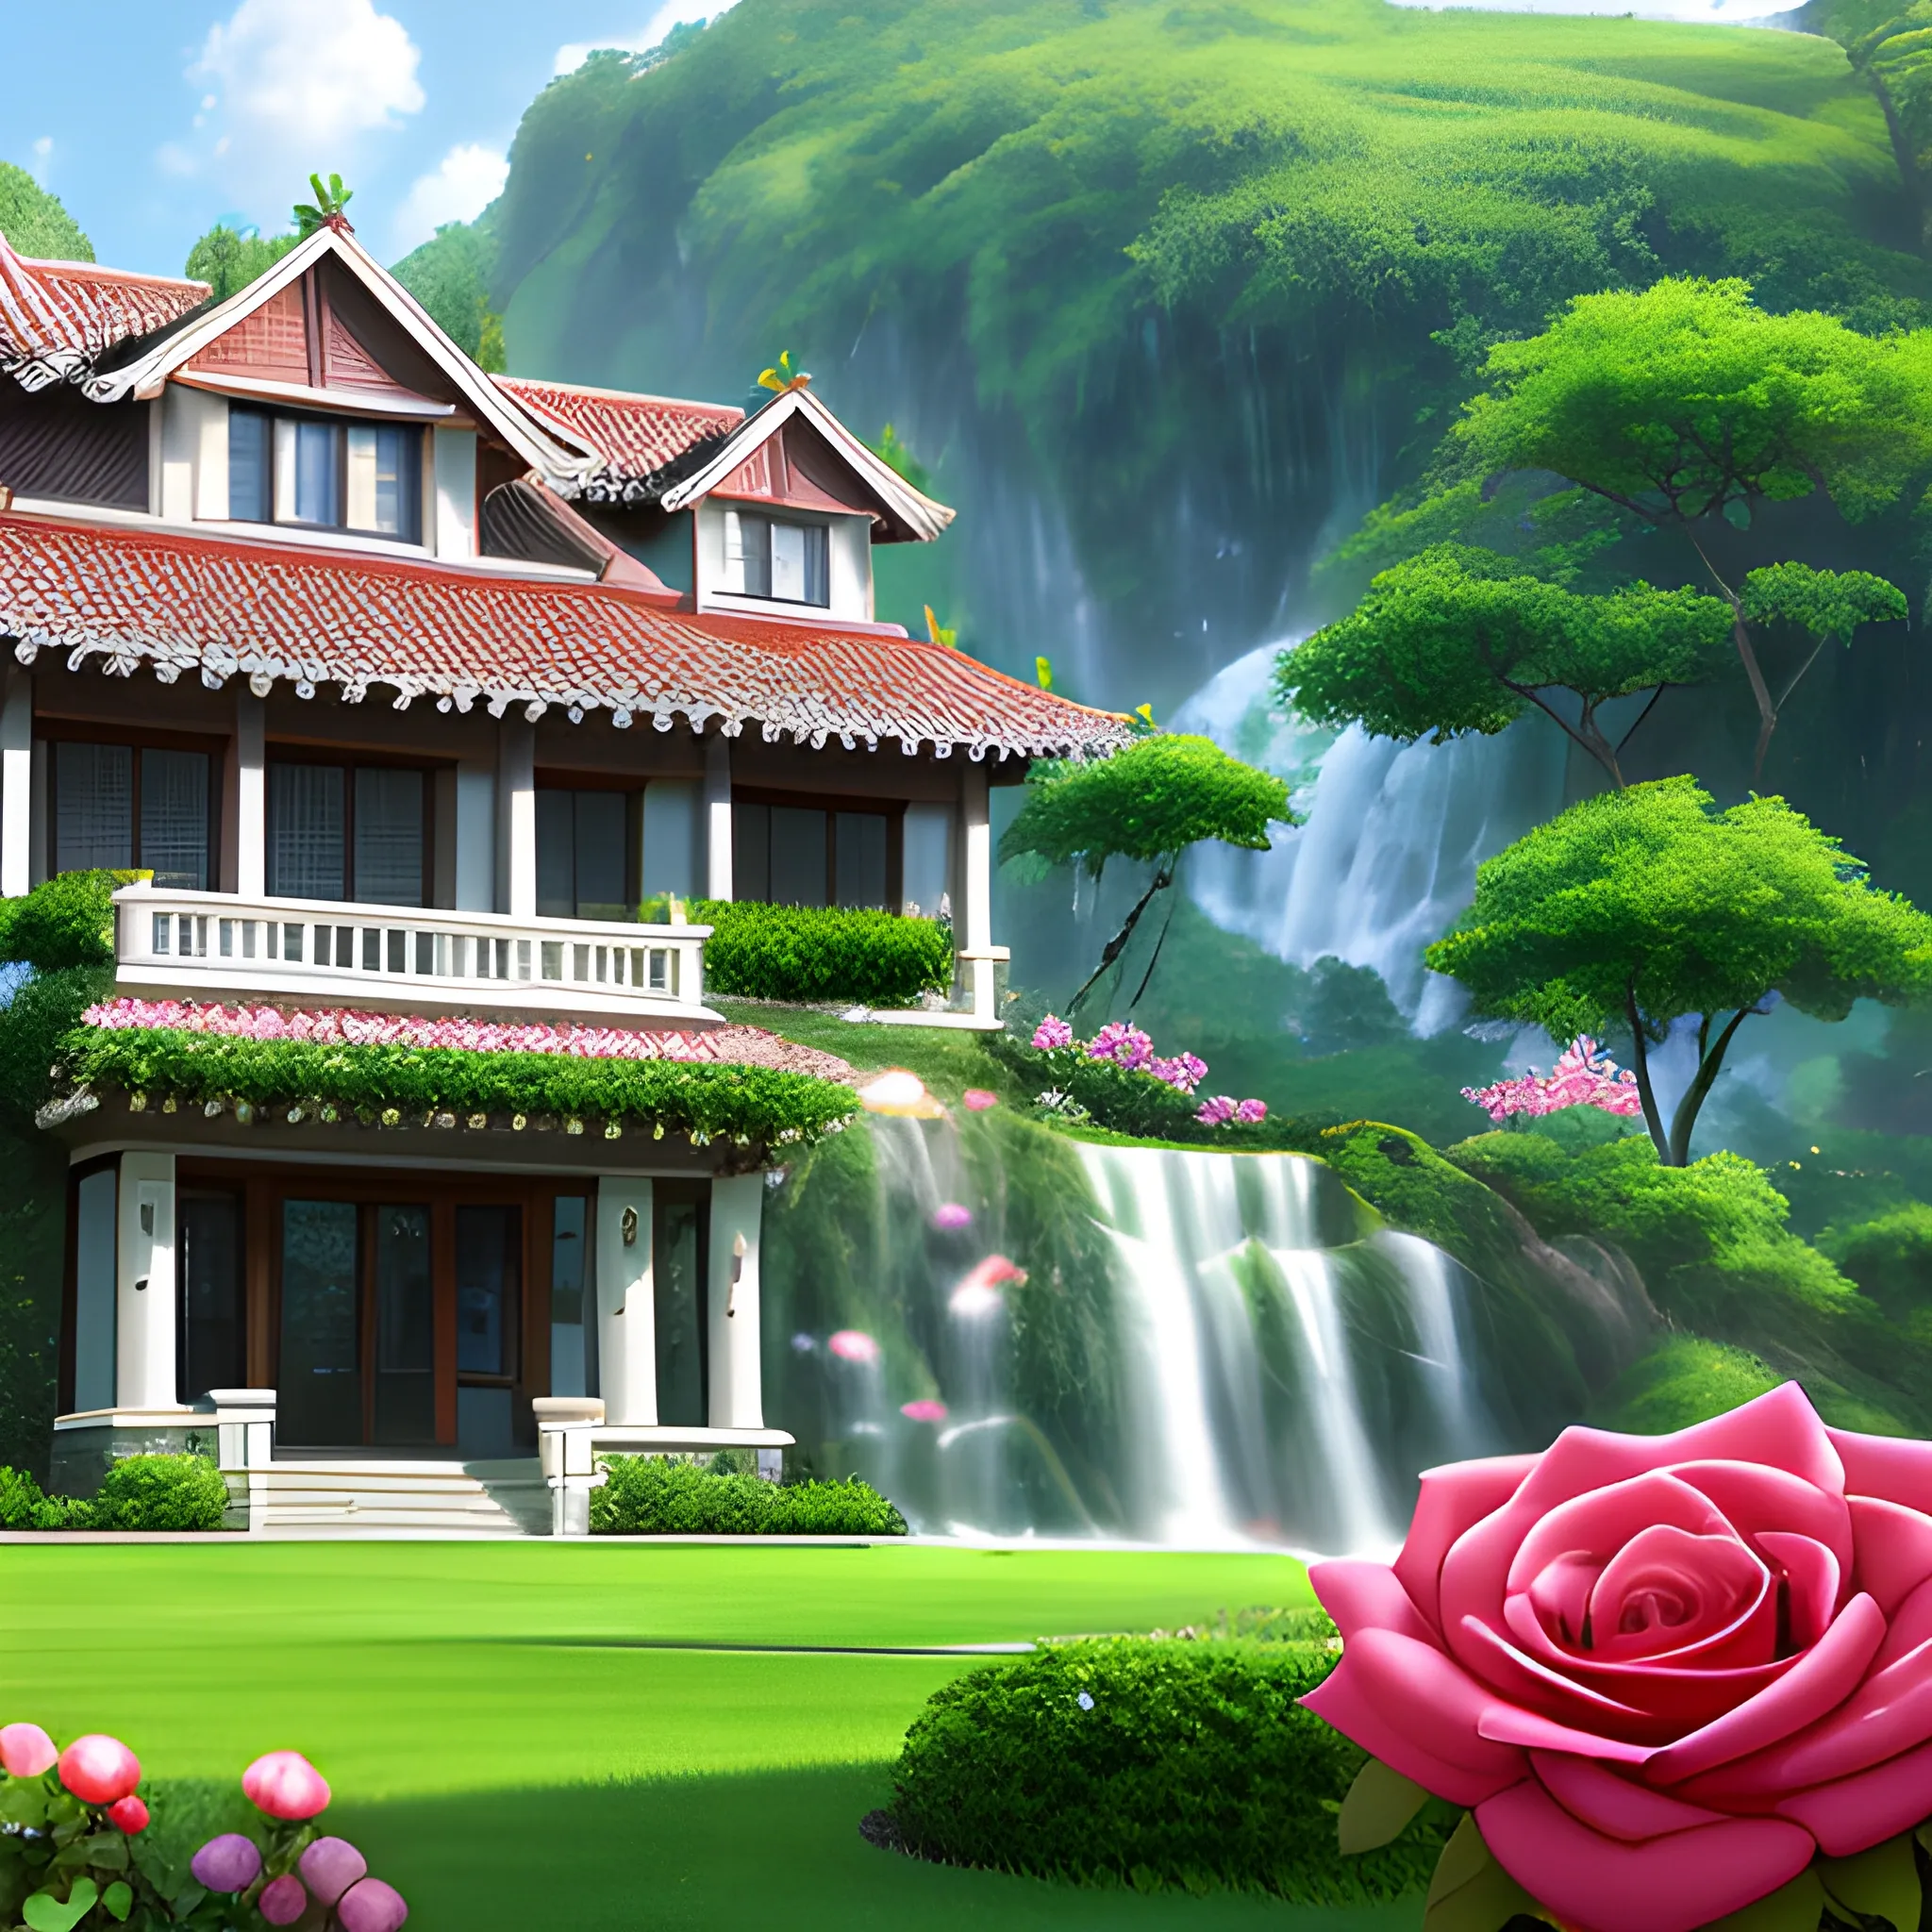 A realistic CG rendering of Juck Zhang, with a green villa on it, green grass besides the villa, a white cotton cloud in the sky, and a rose waterfall flowing from the roof to the grass.HD --ar 9:16